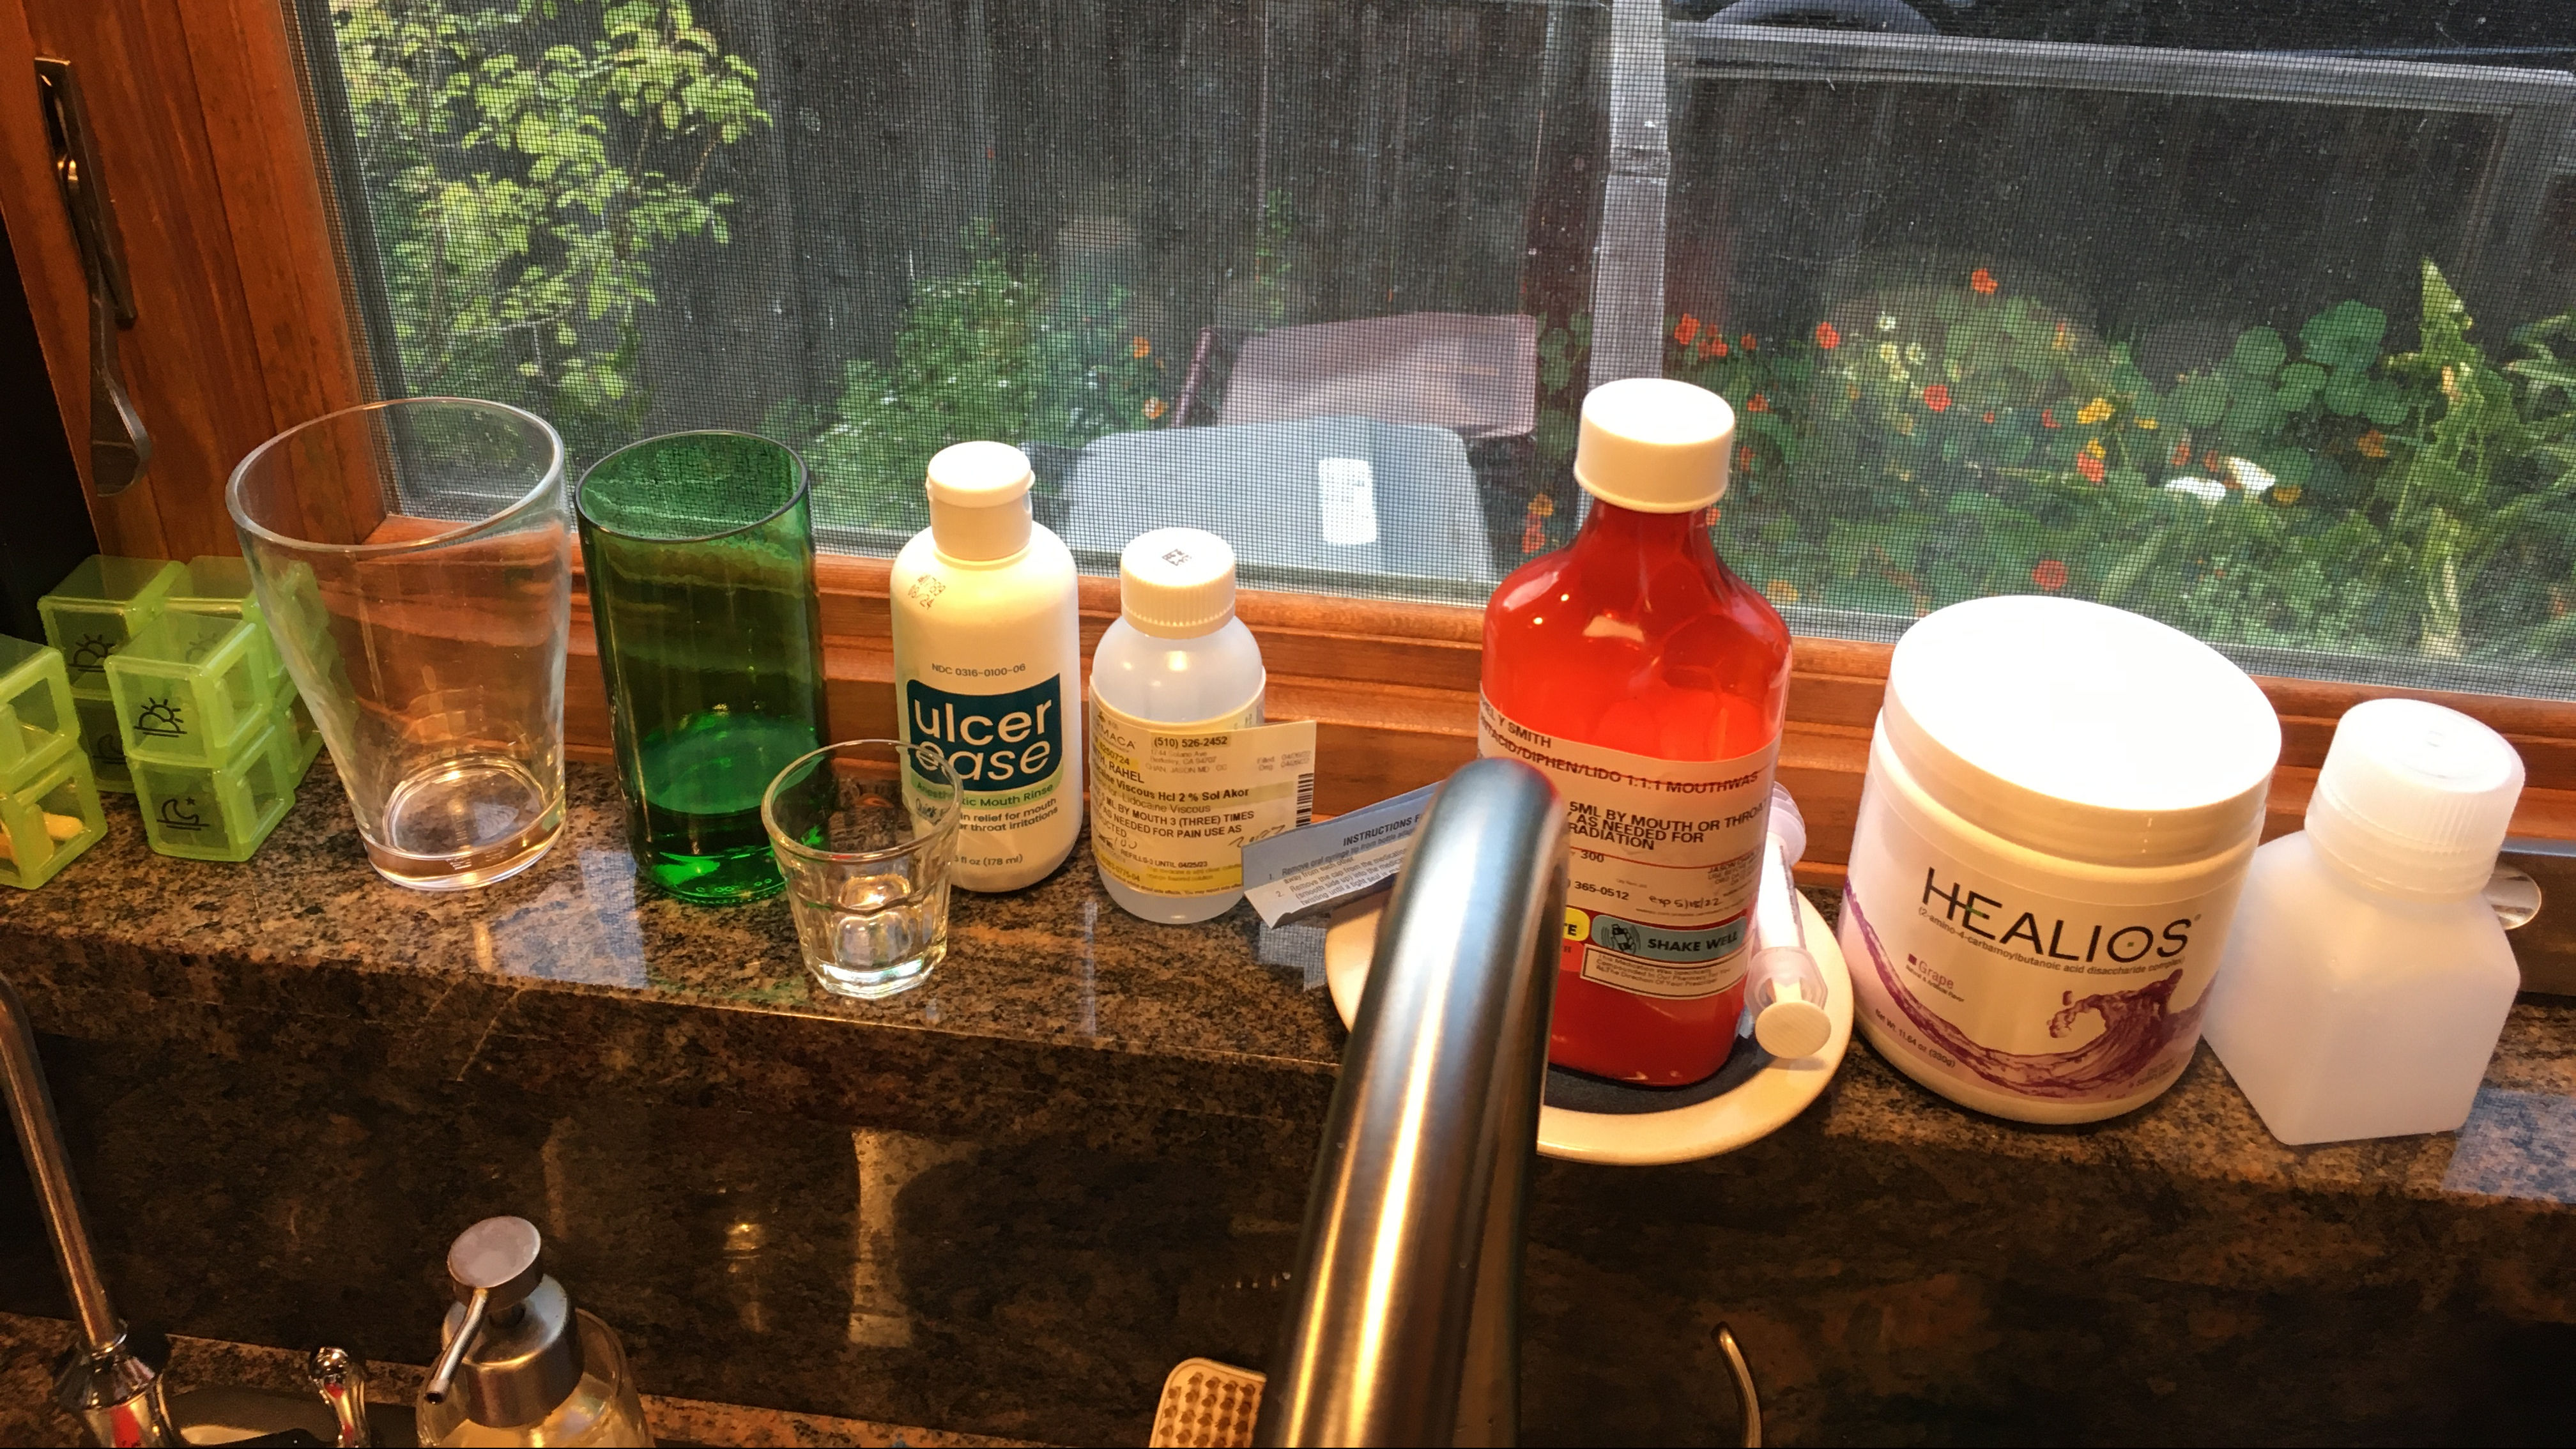 Photo of several pill containers and bottles of numbing solution lined up on a kitchen windowsill, with plant and a fence showing through the window.